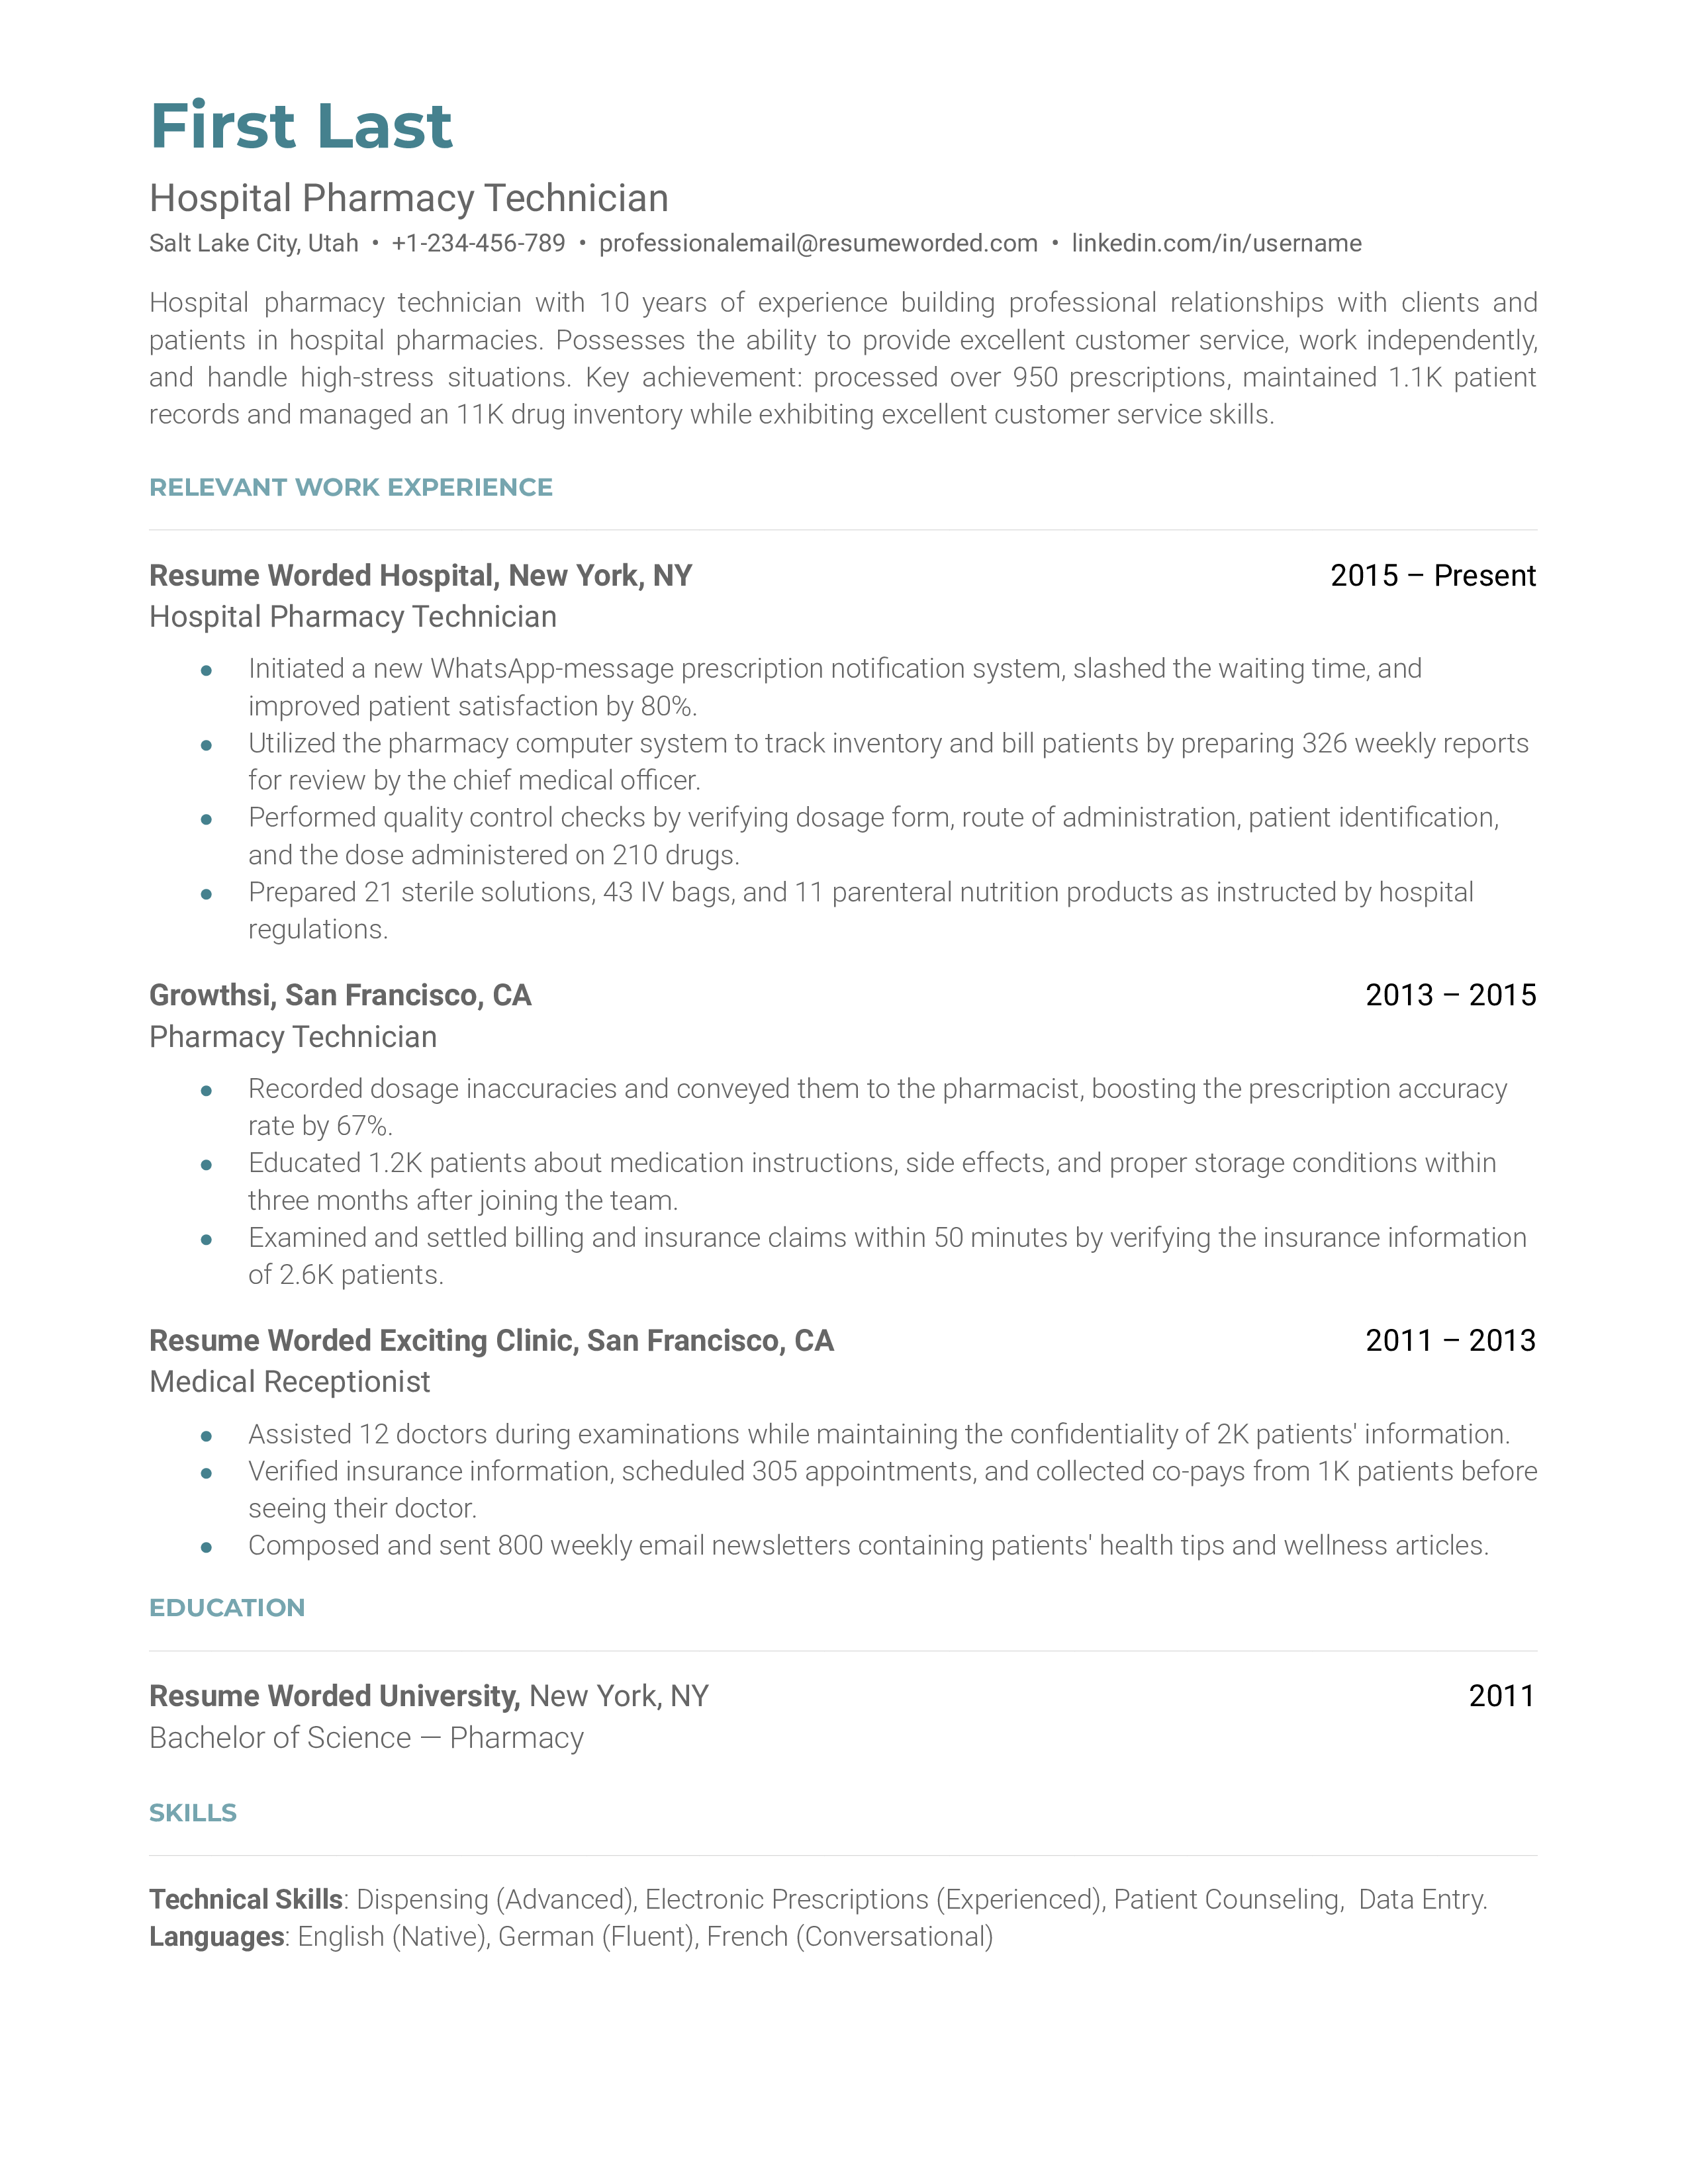 A hospital pharmacy technician resume sample that highlights the applicant’s quantifiable success and key achievements.